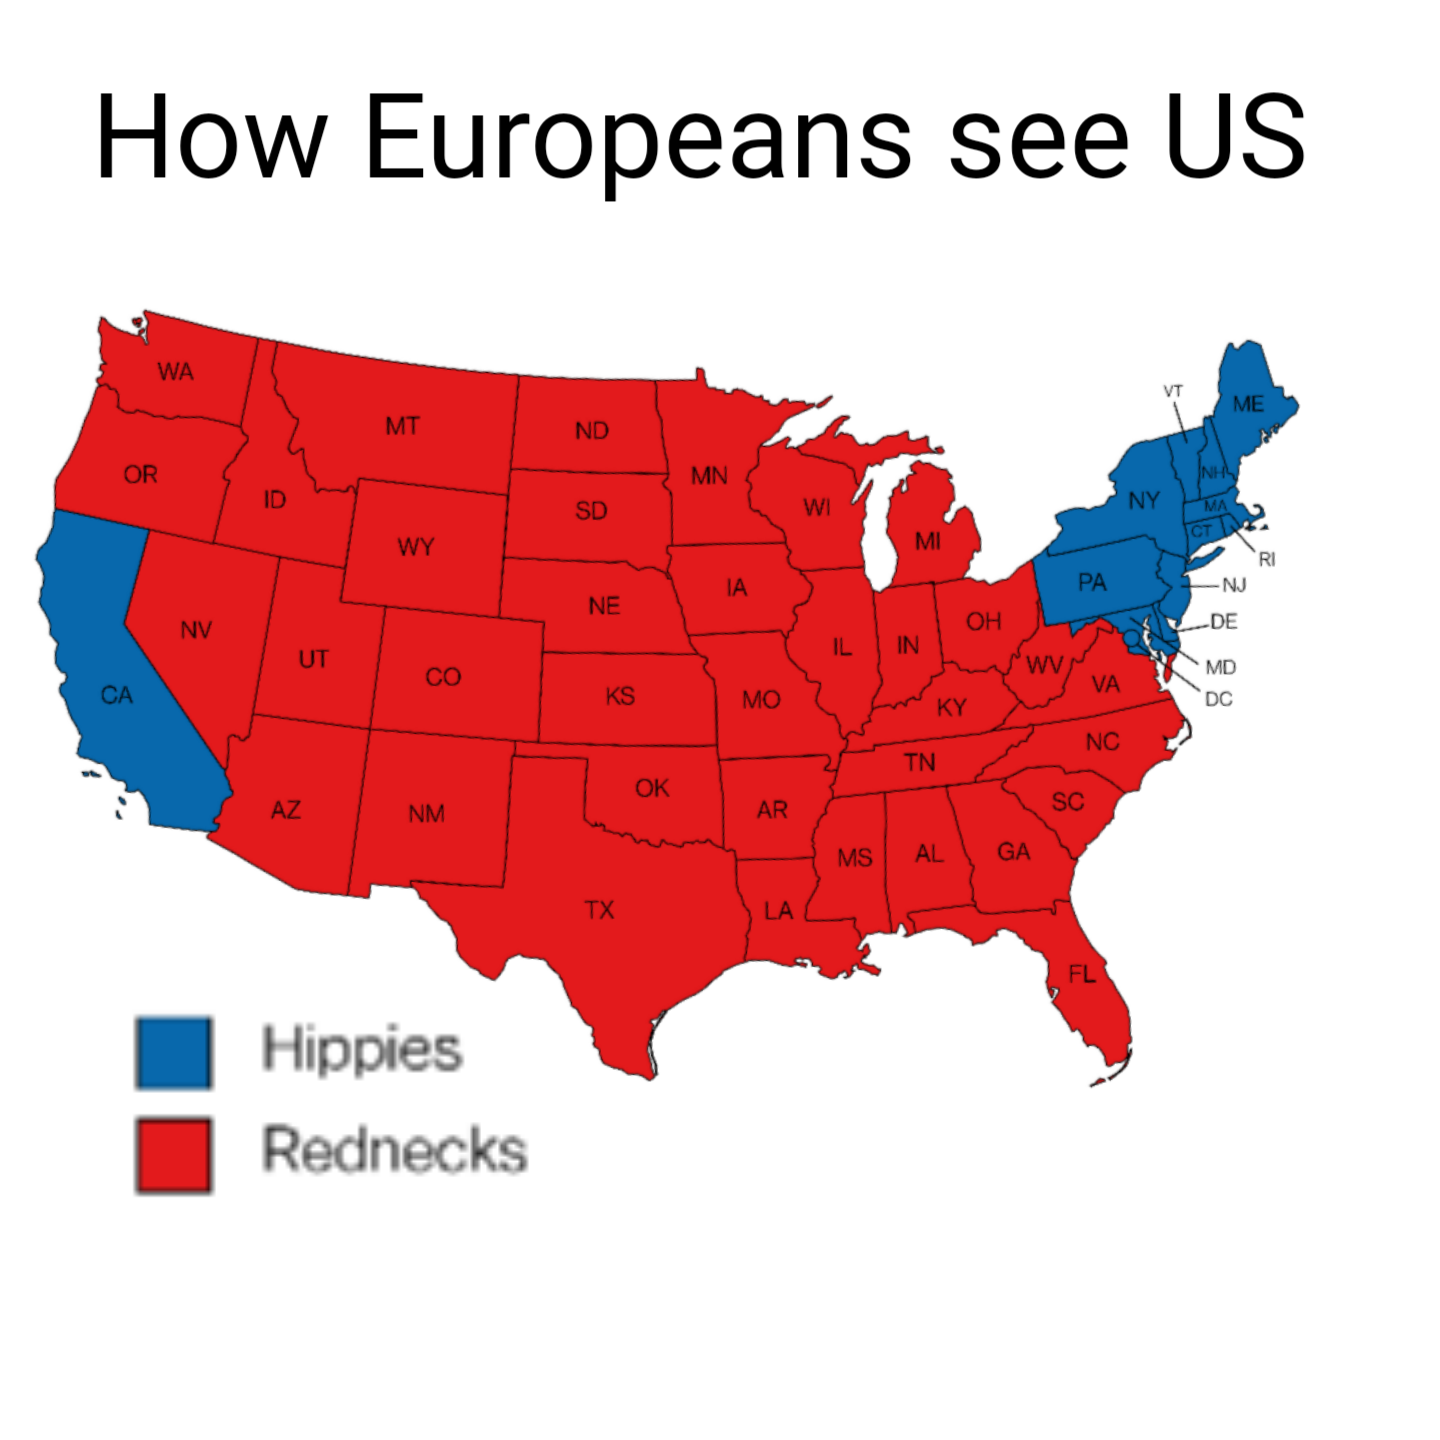 How Europeans see US